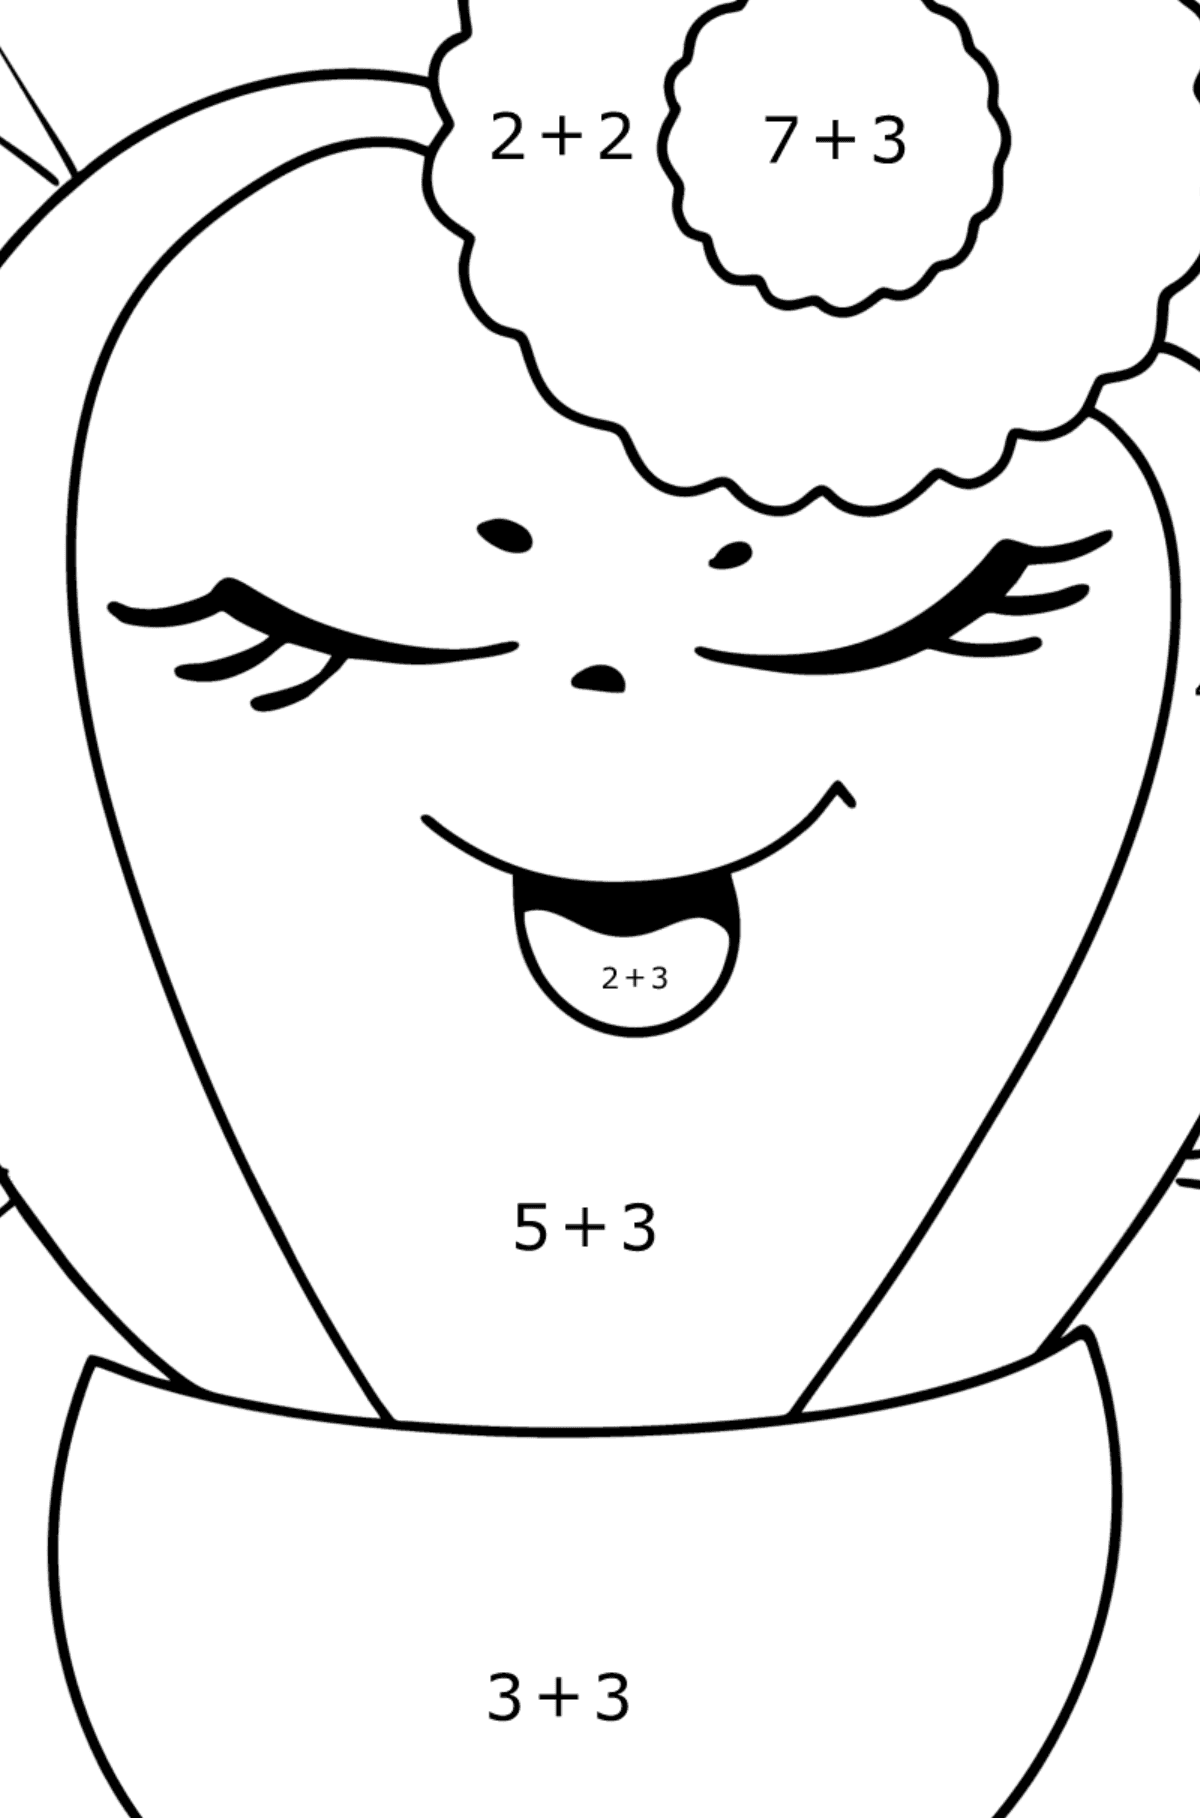 Cactus girl coloring page - Math Coloring - Addition for Kids